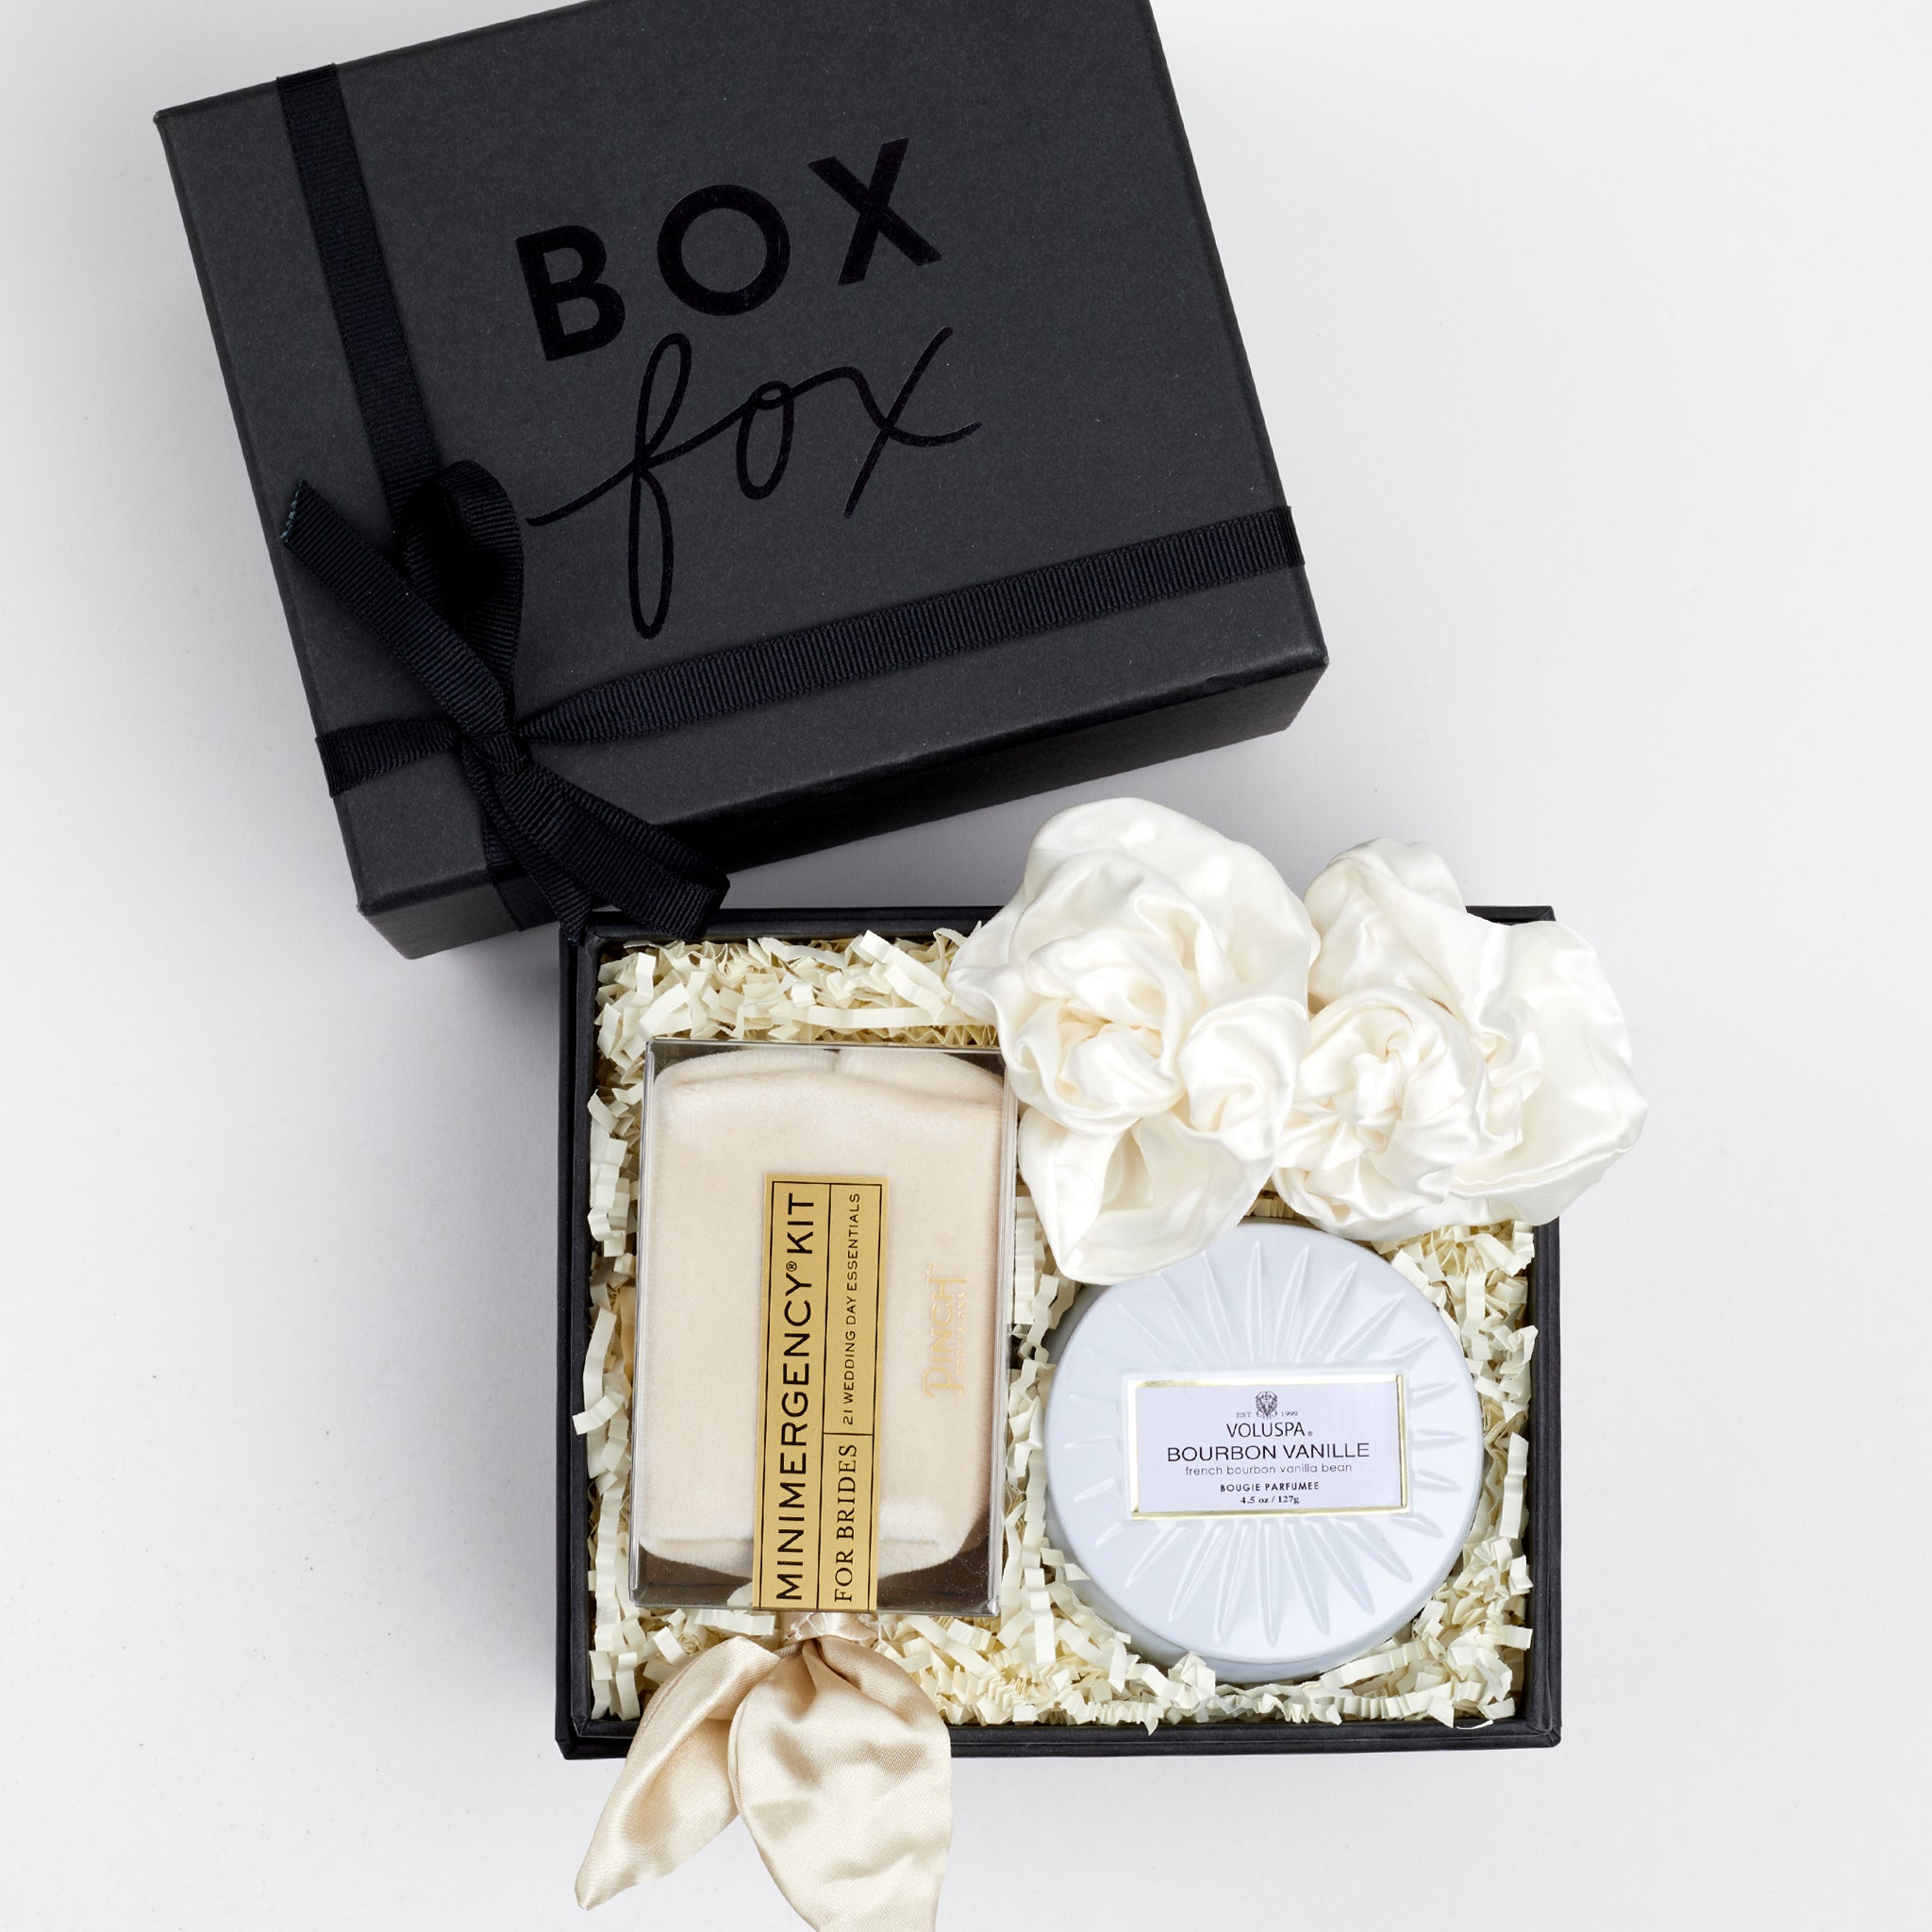 BOXFOX Matte Black Gift Box with Pinch Provisions Ivory Velvet Bridal Emergency Kit, Voluspa White Tin Candle and 2 Ivory Silk ScrunchiesBOXFOX For the Bride Gift Box filled with Ivory crinkle paper